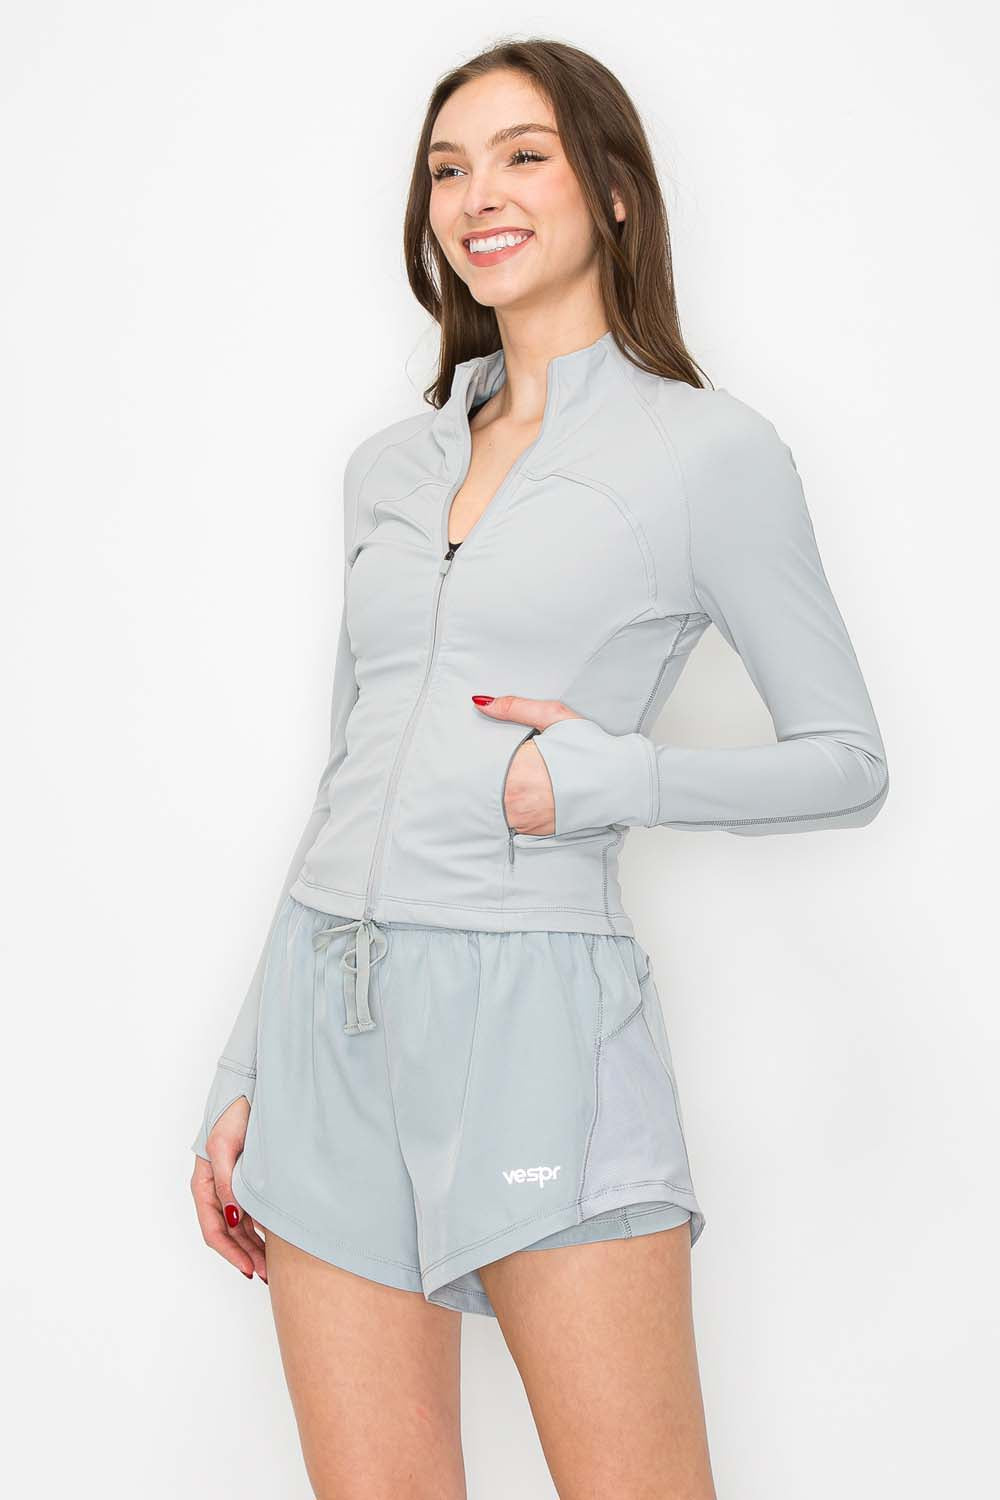 Contour Running Jacket - Smooth Silver - angle